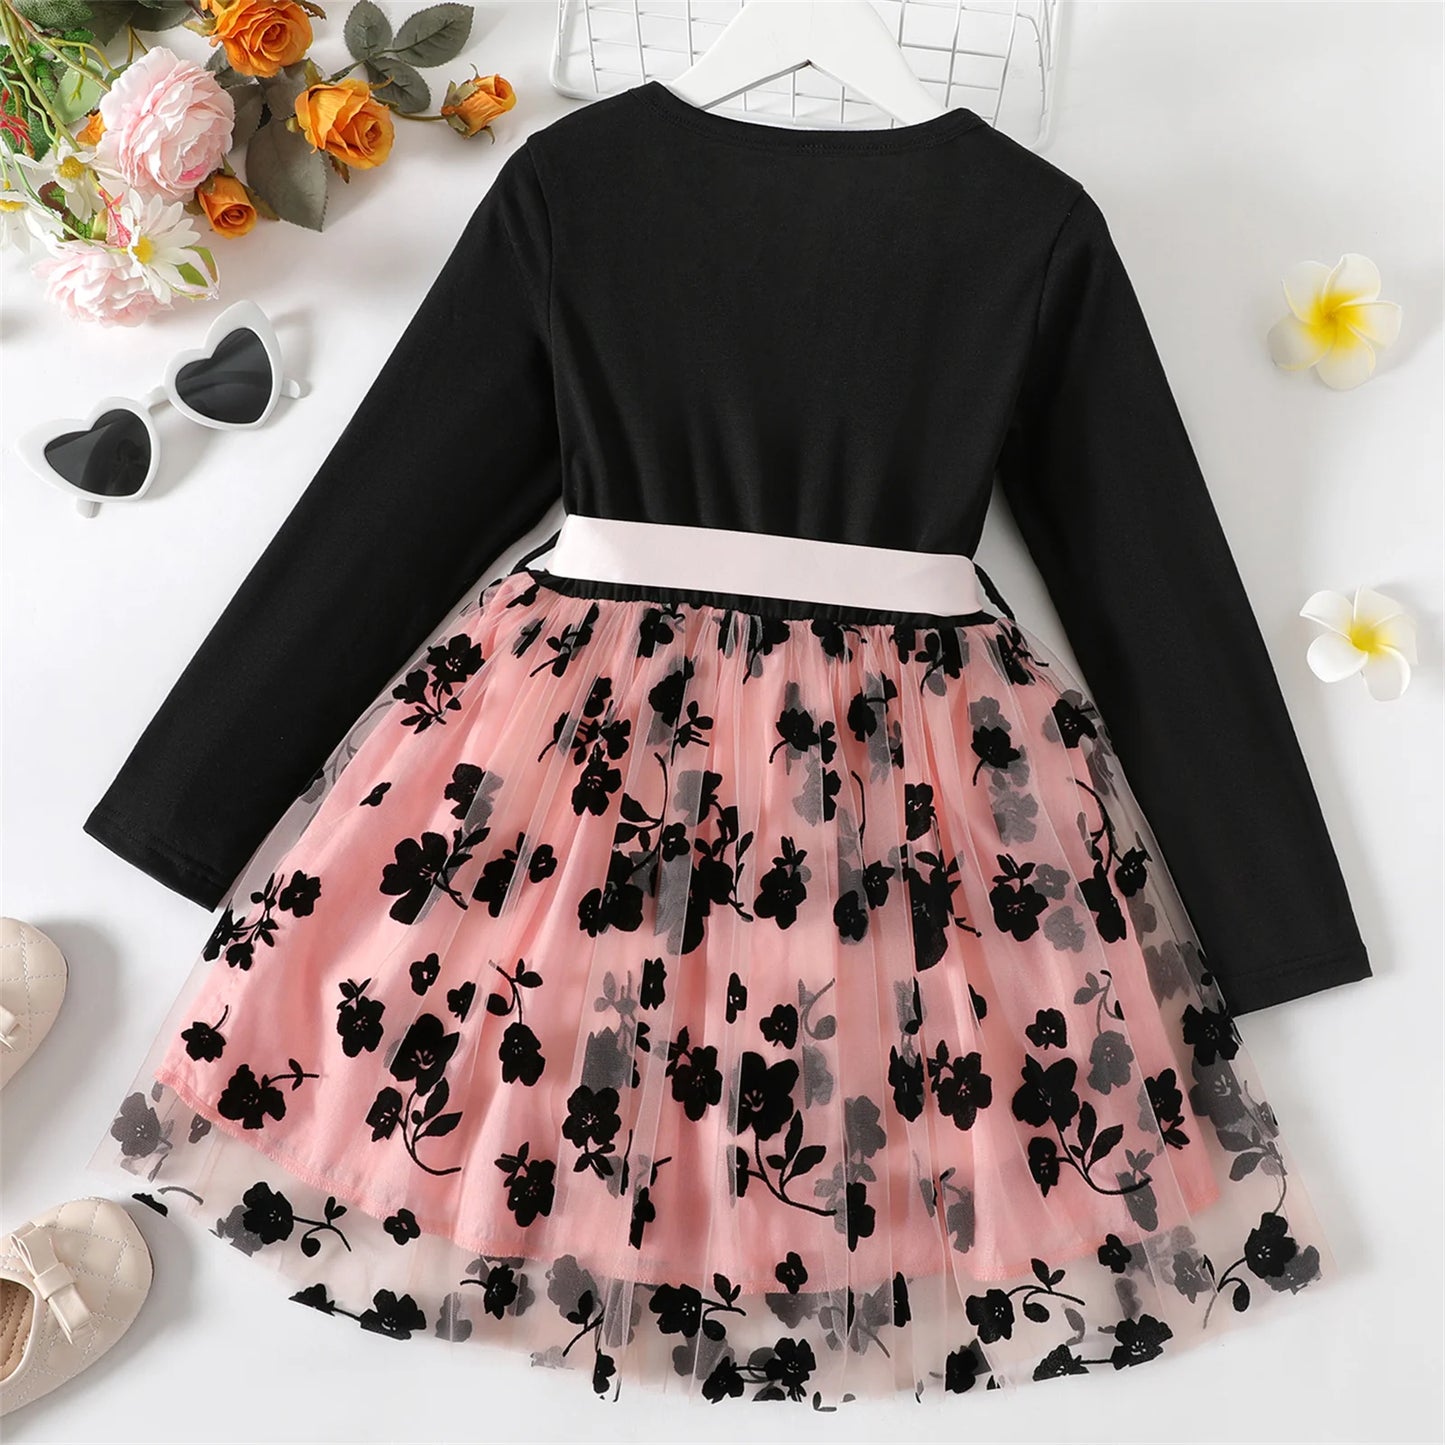 Floral Girl Dresses Embroidered Belted Mesh Splice Long-sleeve Dress Kids Clothes